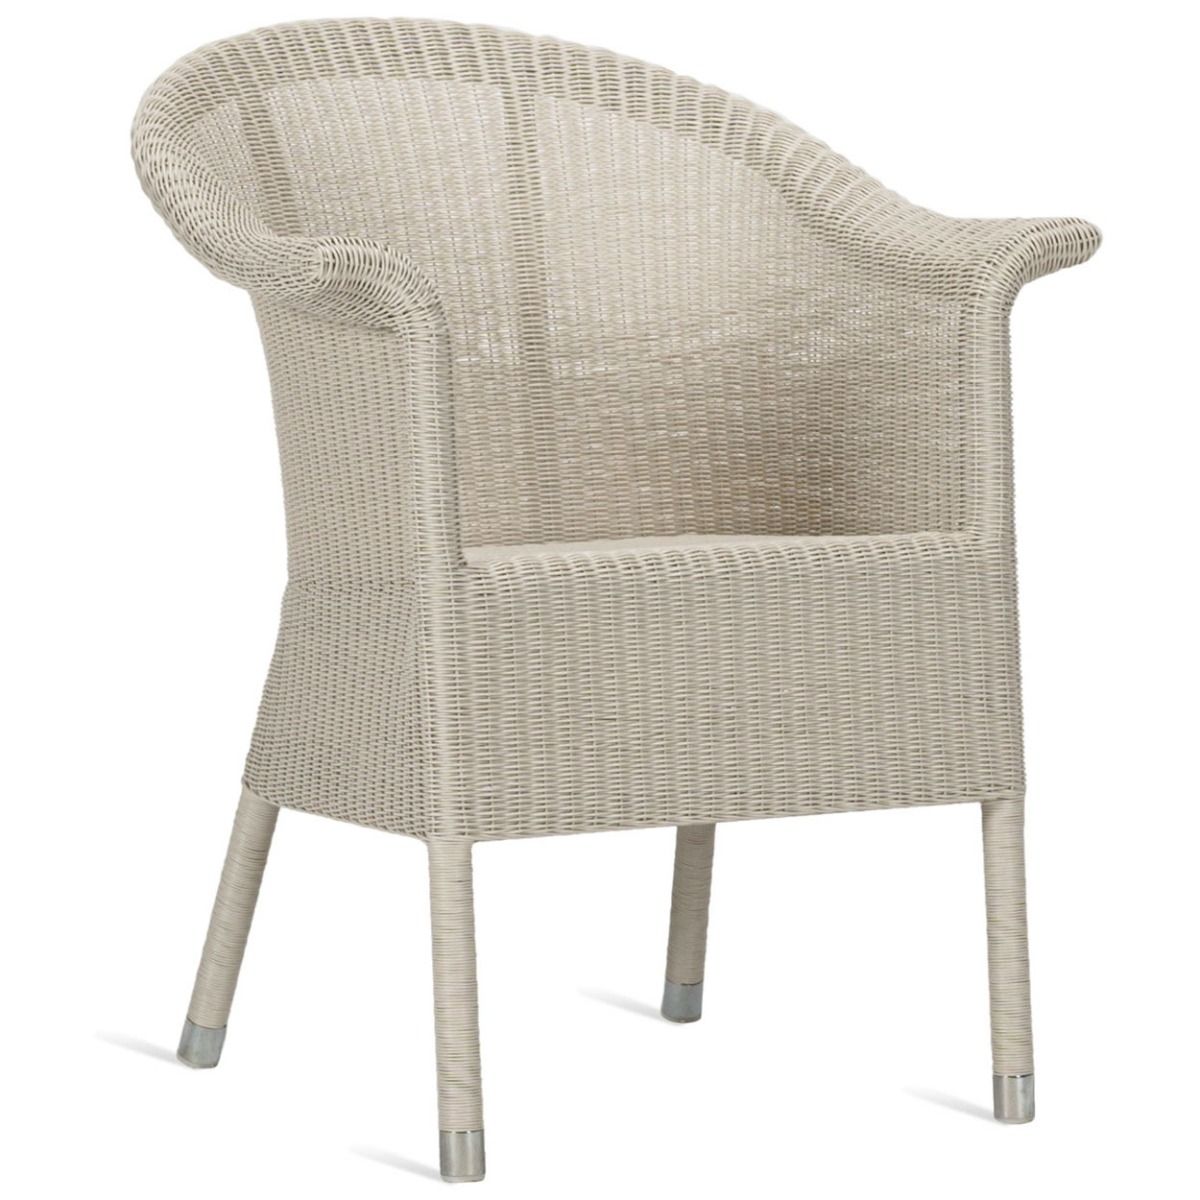 Vincent Sheppard Kenzo Dining Chair– Wicker Tuinstoel – Old Lace – Aluminium Frame